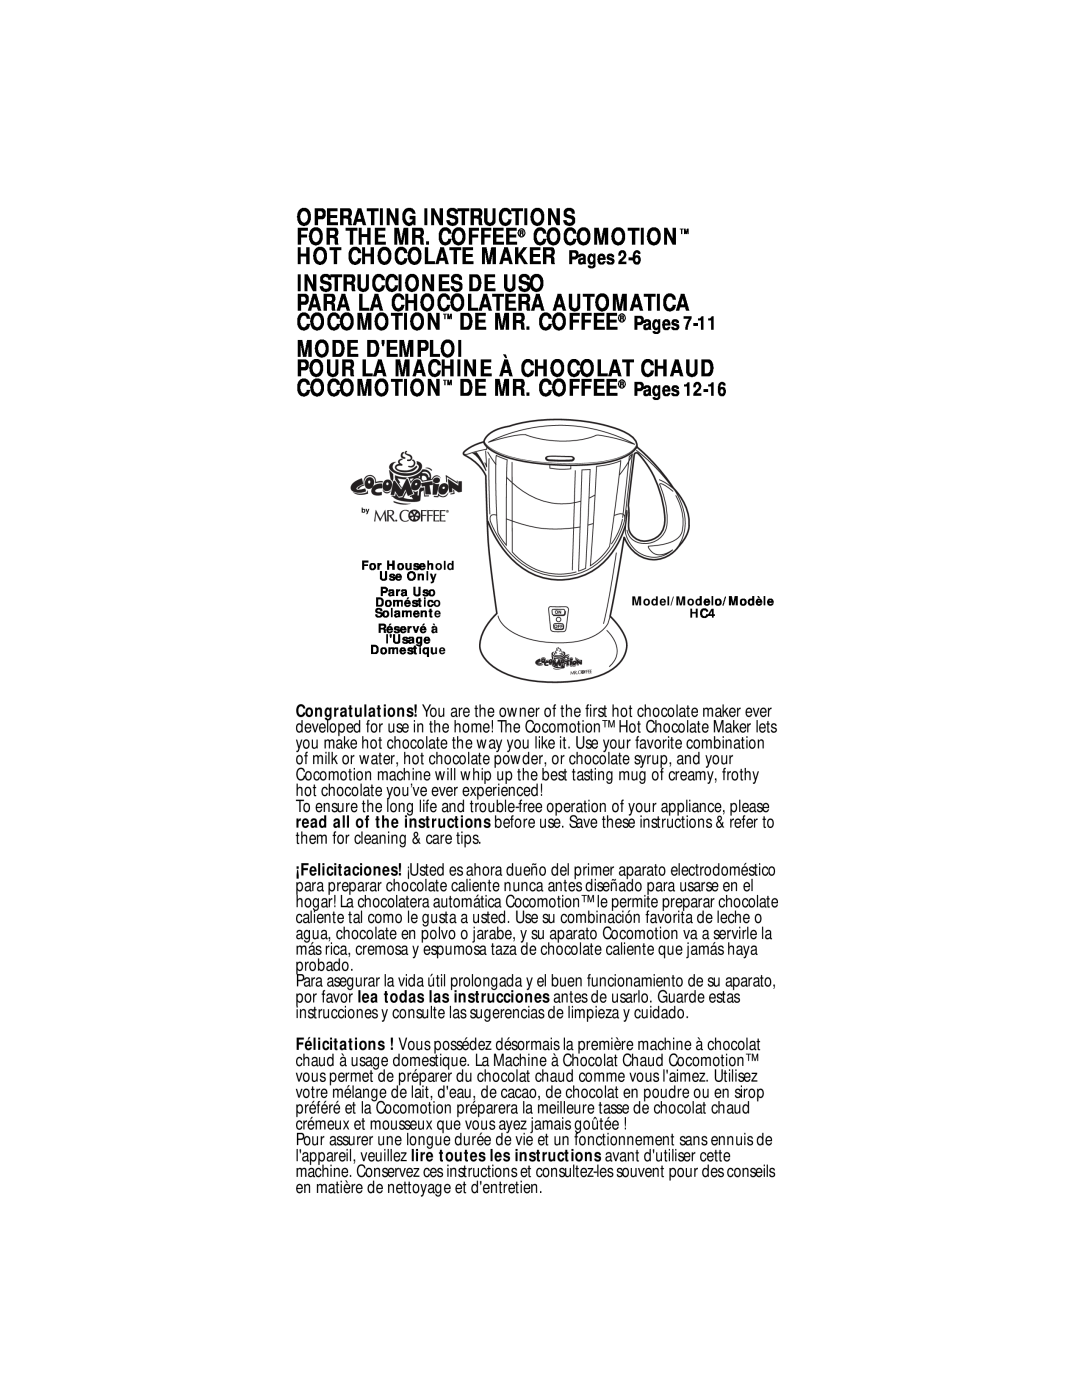 Mr. Coffee HC4 operating instructions FOR THE MR. COFFEE COCOMOTION HOT CHOCOLATE MAKER Pages, Operating Instructions 